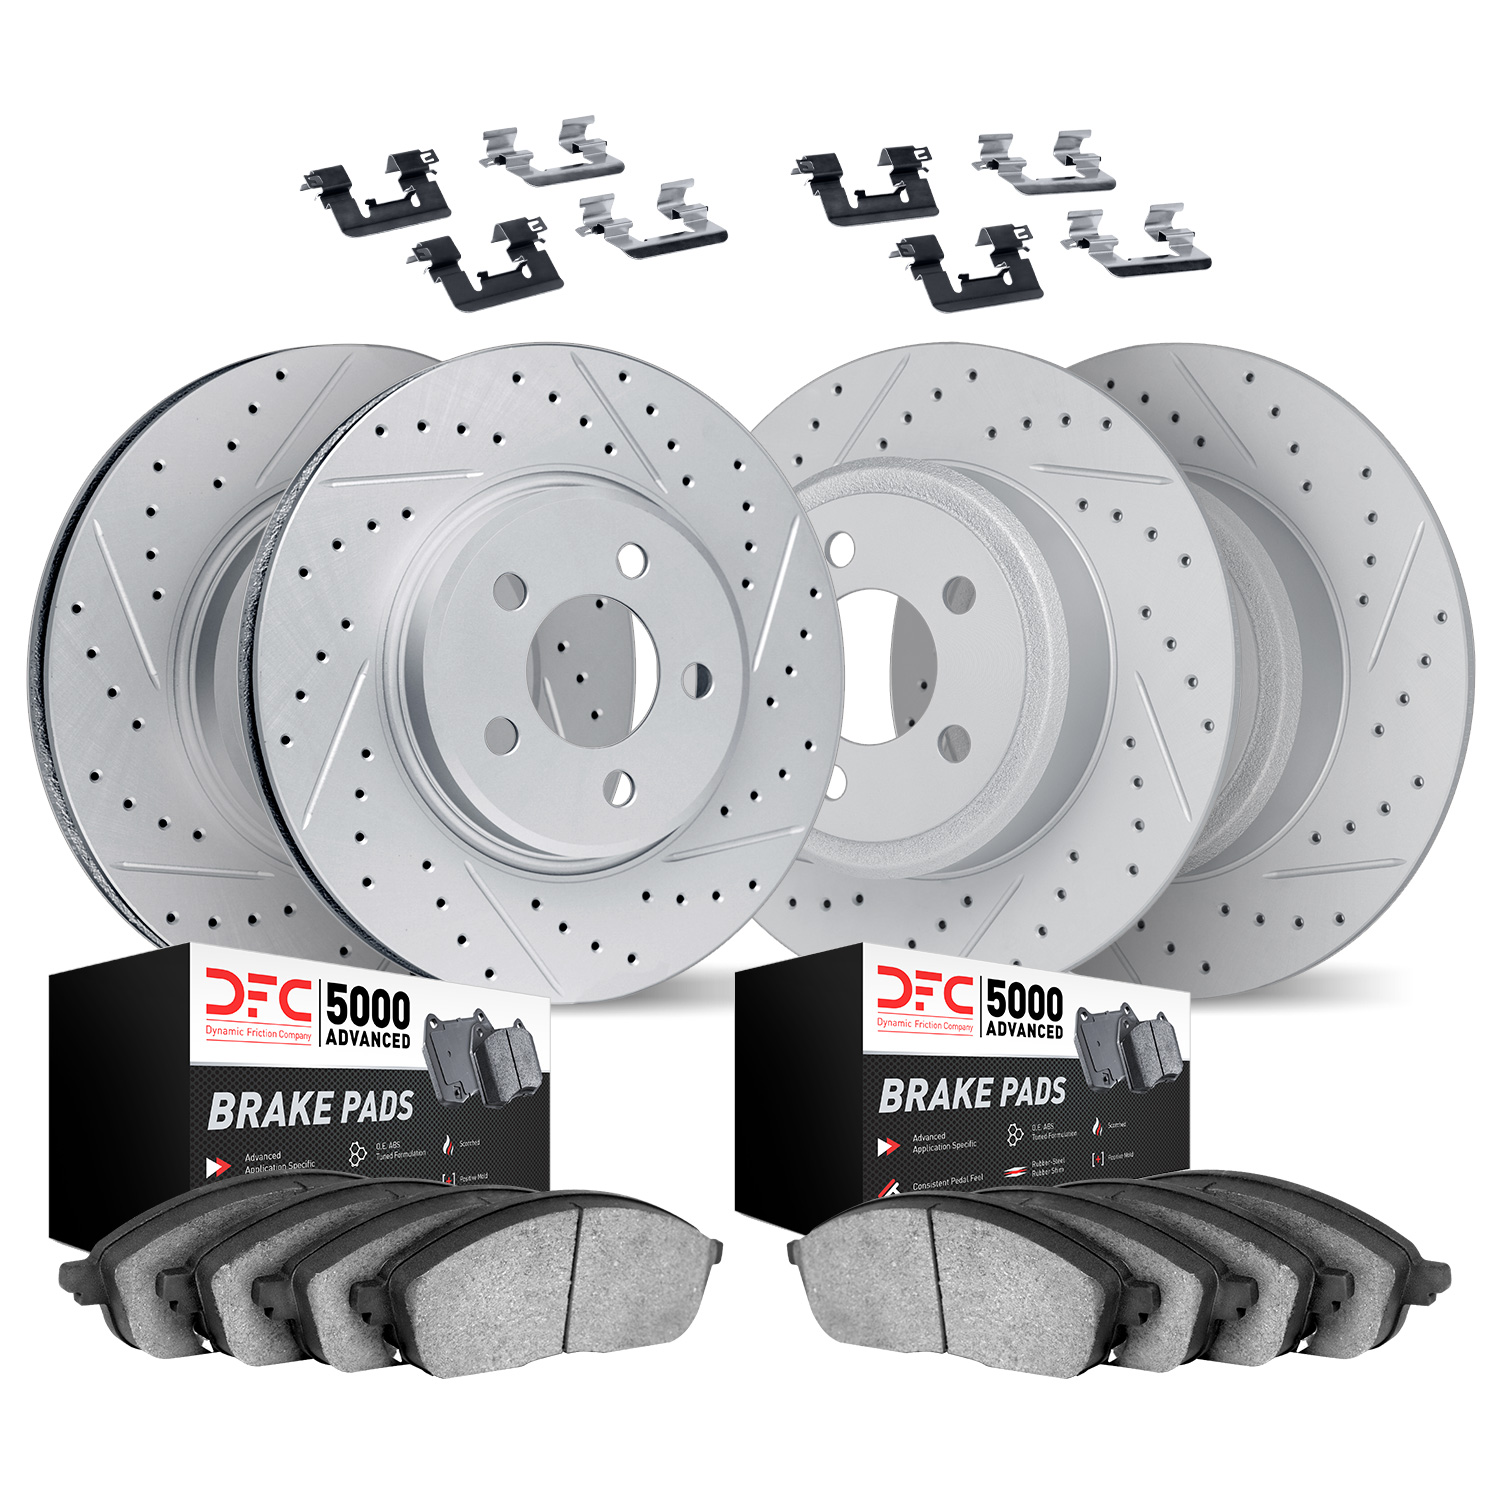 2514-59037 Geoperformance Drilled/Slotted Rotors w/5000 Advanced Brake Pads Kit & Hardware, 2001-2002 Acura/Honda, Position: Fro